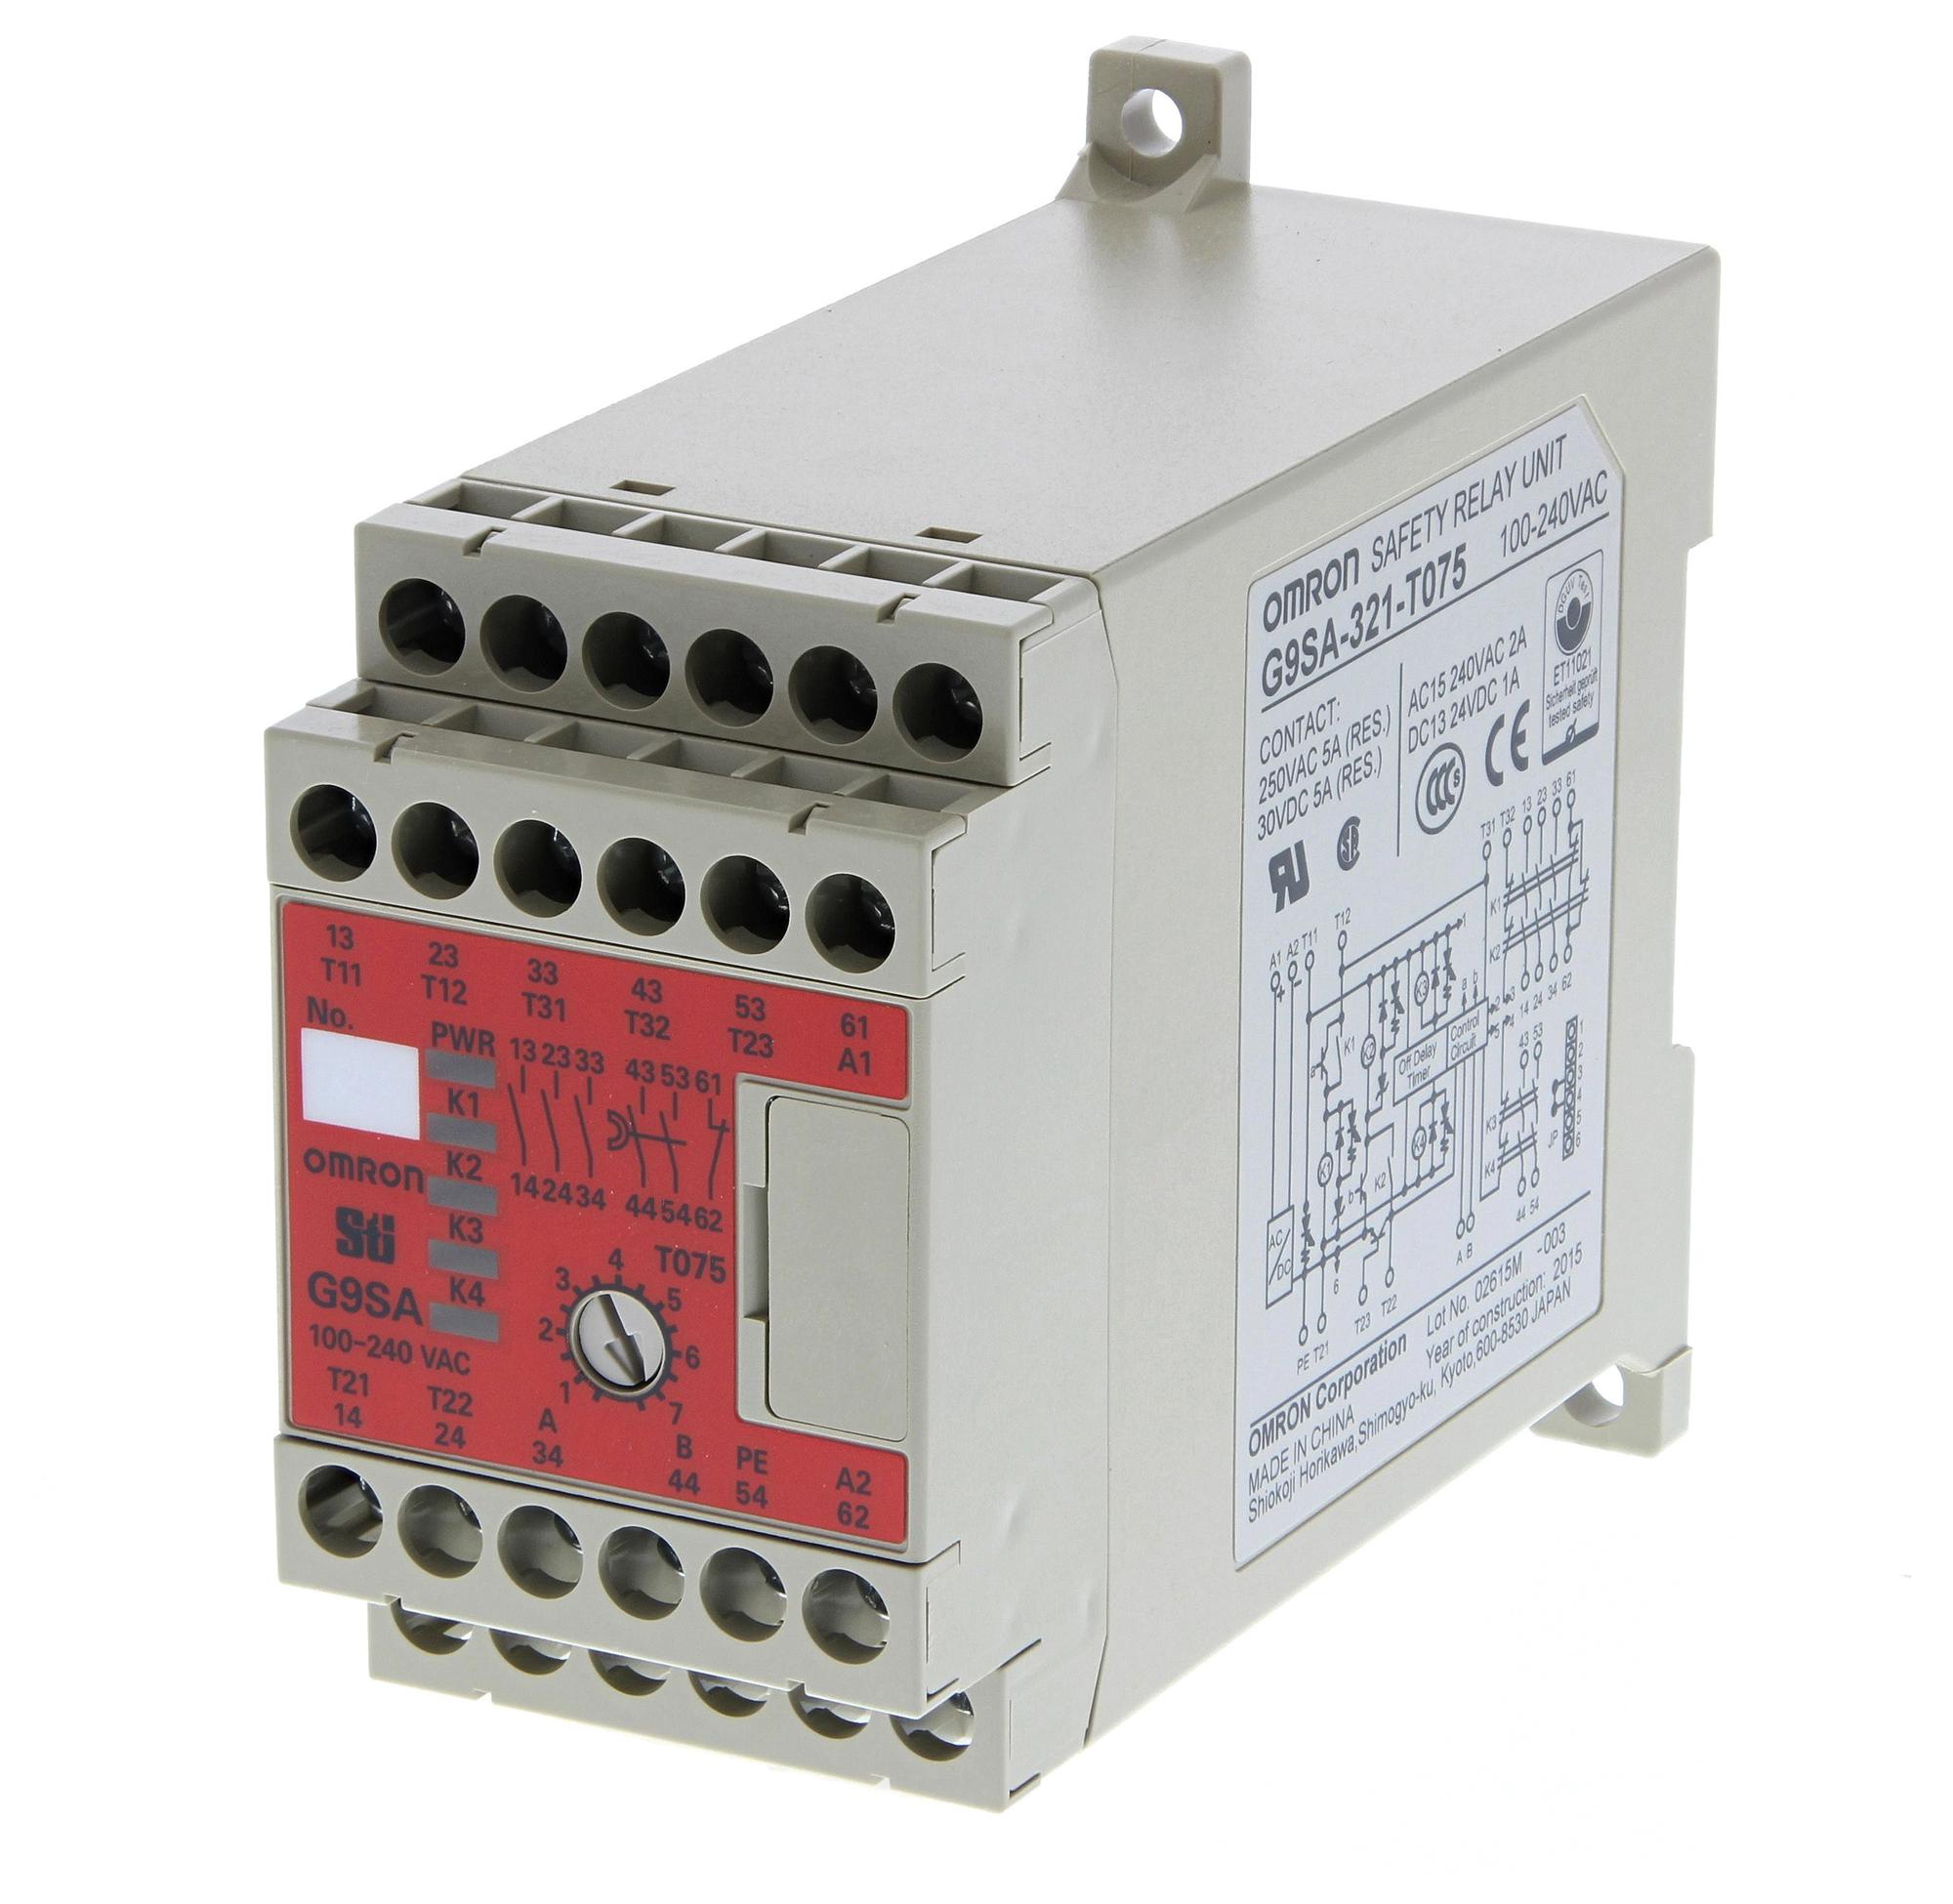 G9SA-321-T30 AC/DC24 SAFETY RELAYS OMRON